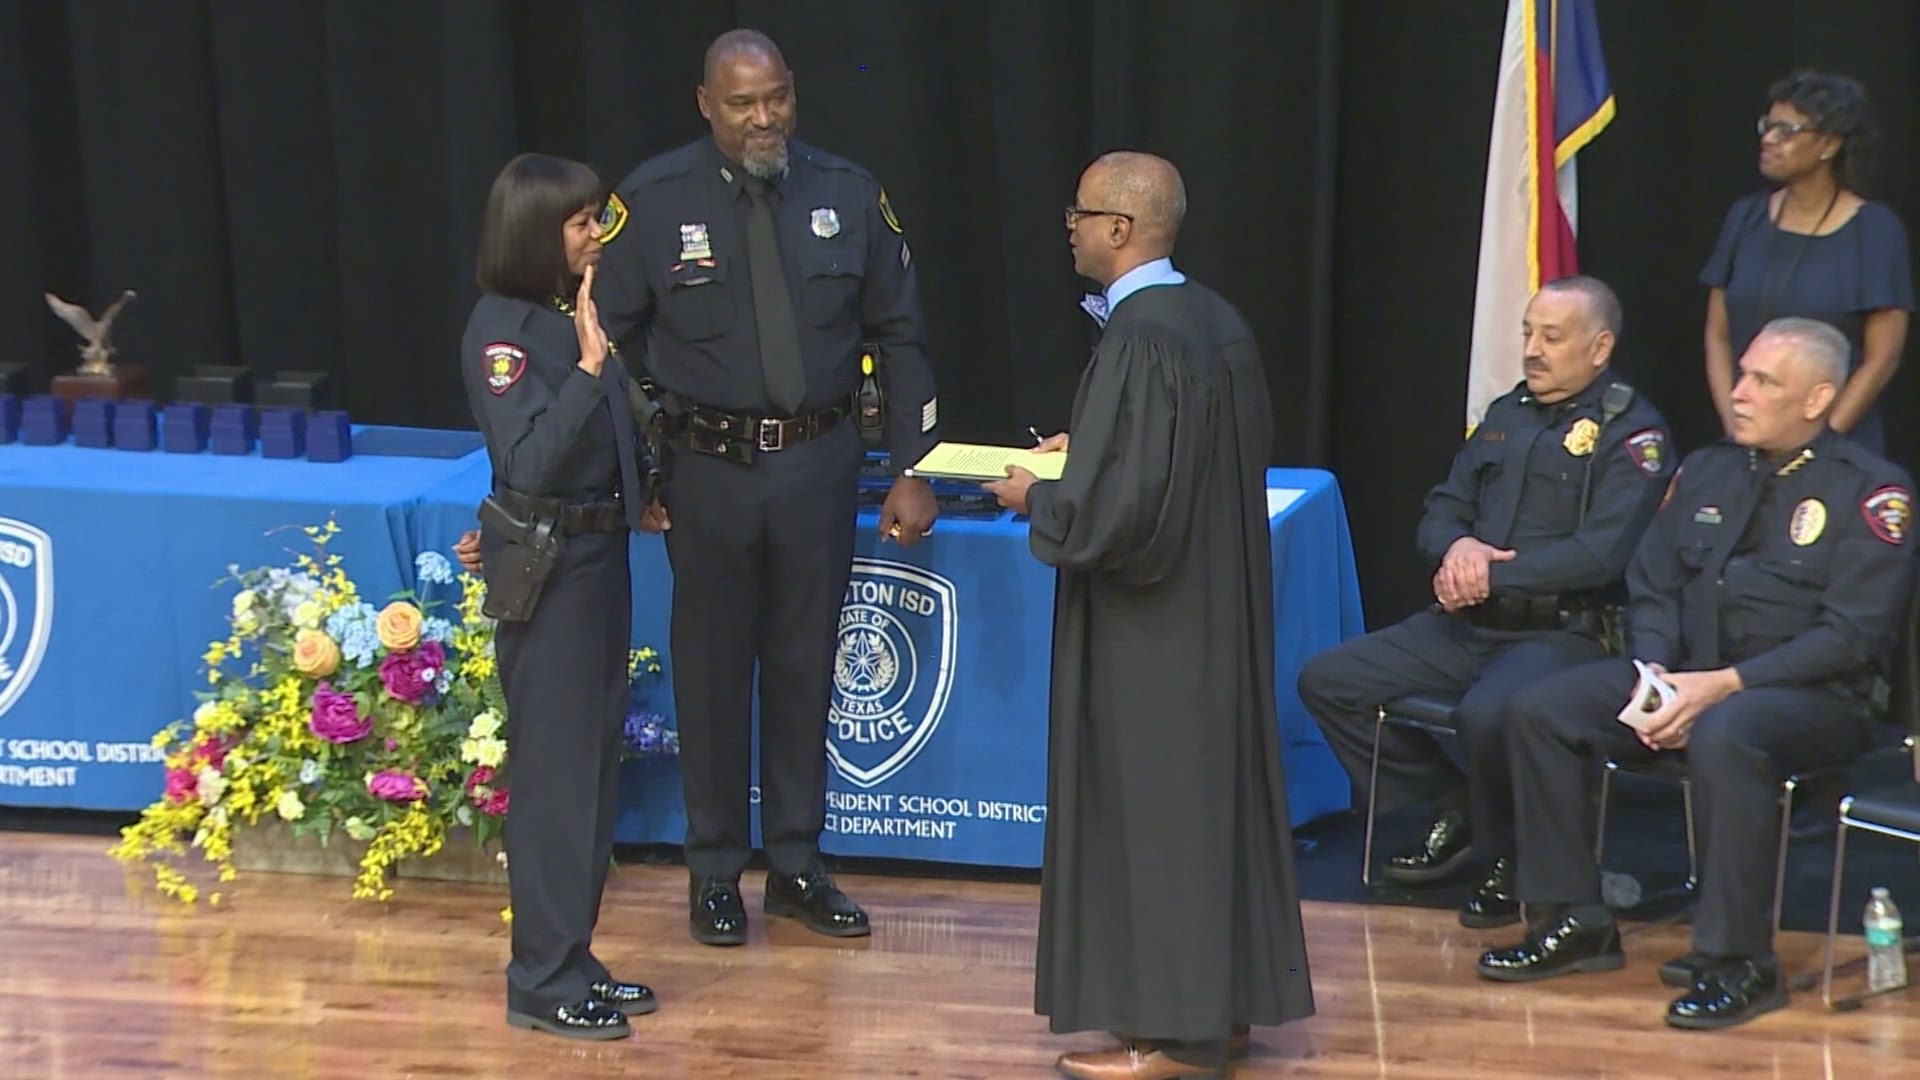 Chief Shamara Garner retired from the Houston Police Department as a lieutenant after 28 years and joined the HISD police force in October 2022.